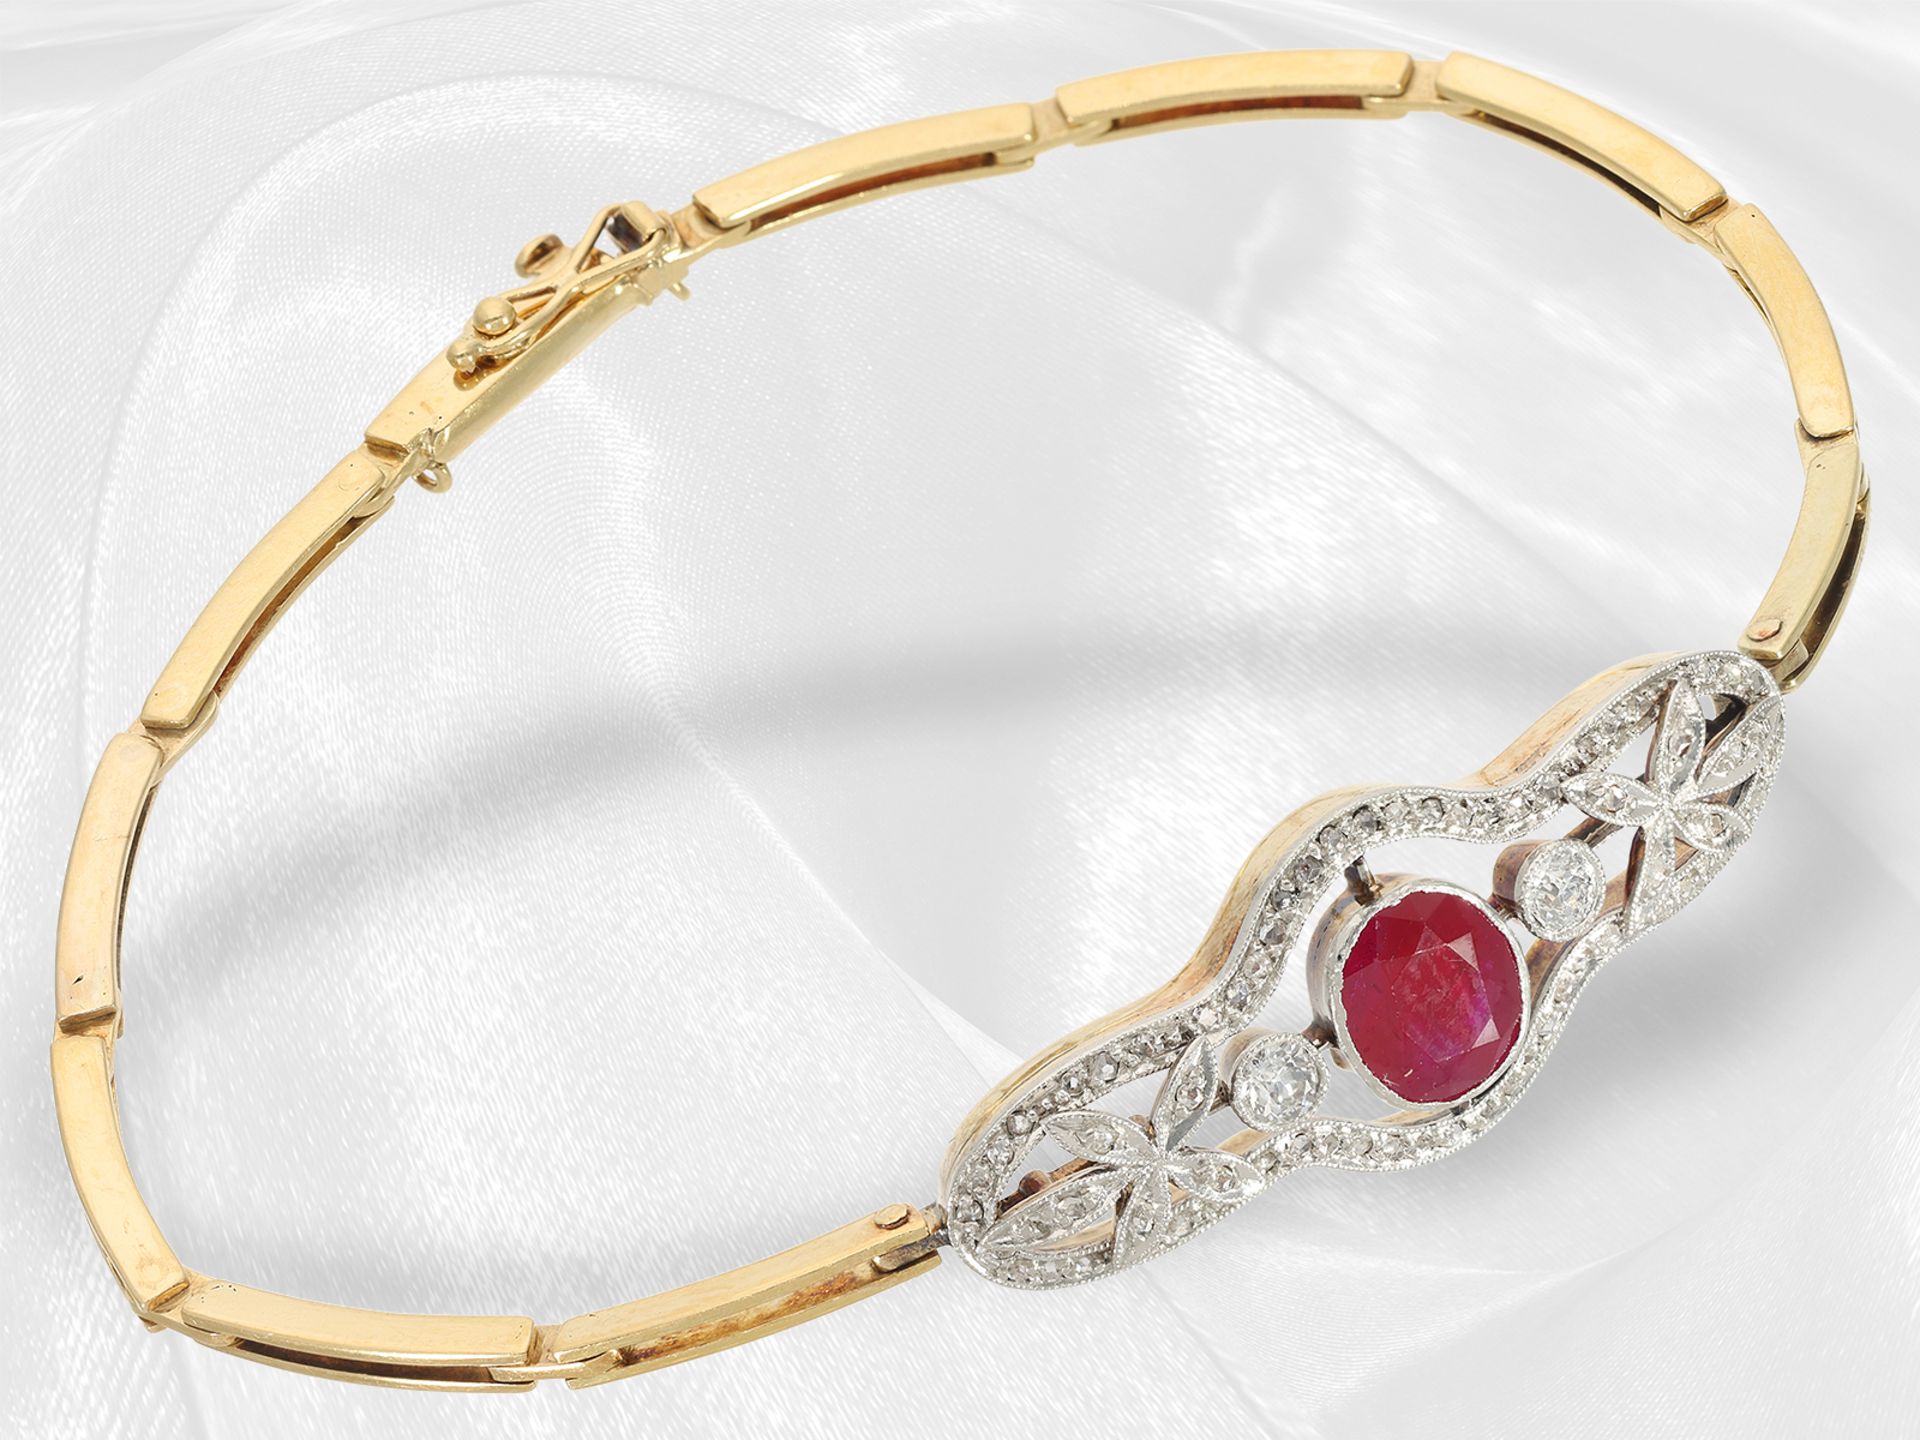 Very beautiful, fine antique bracelet with ruby/diamond setting, approx. 2.3ct, 14K yellow gold, pla - Image 2 of 5